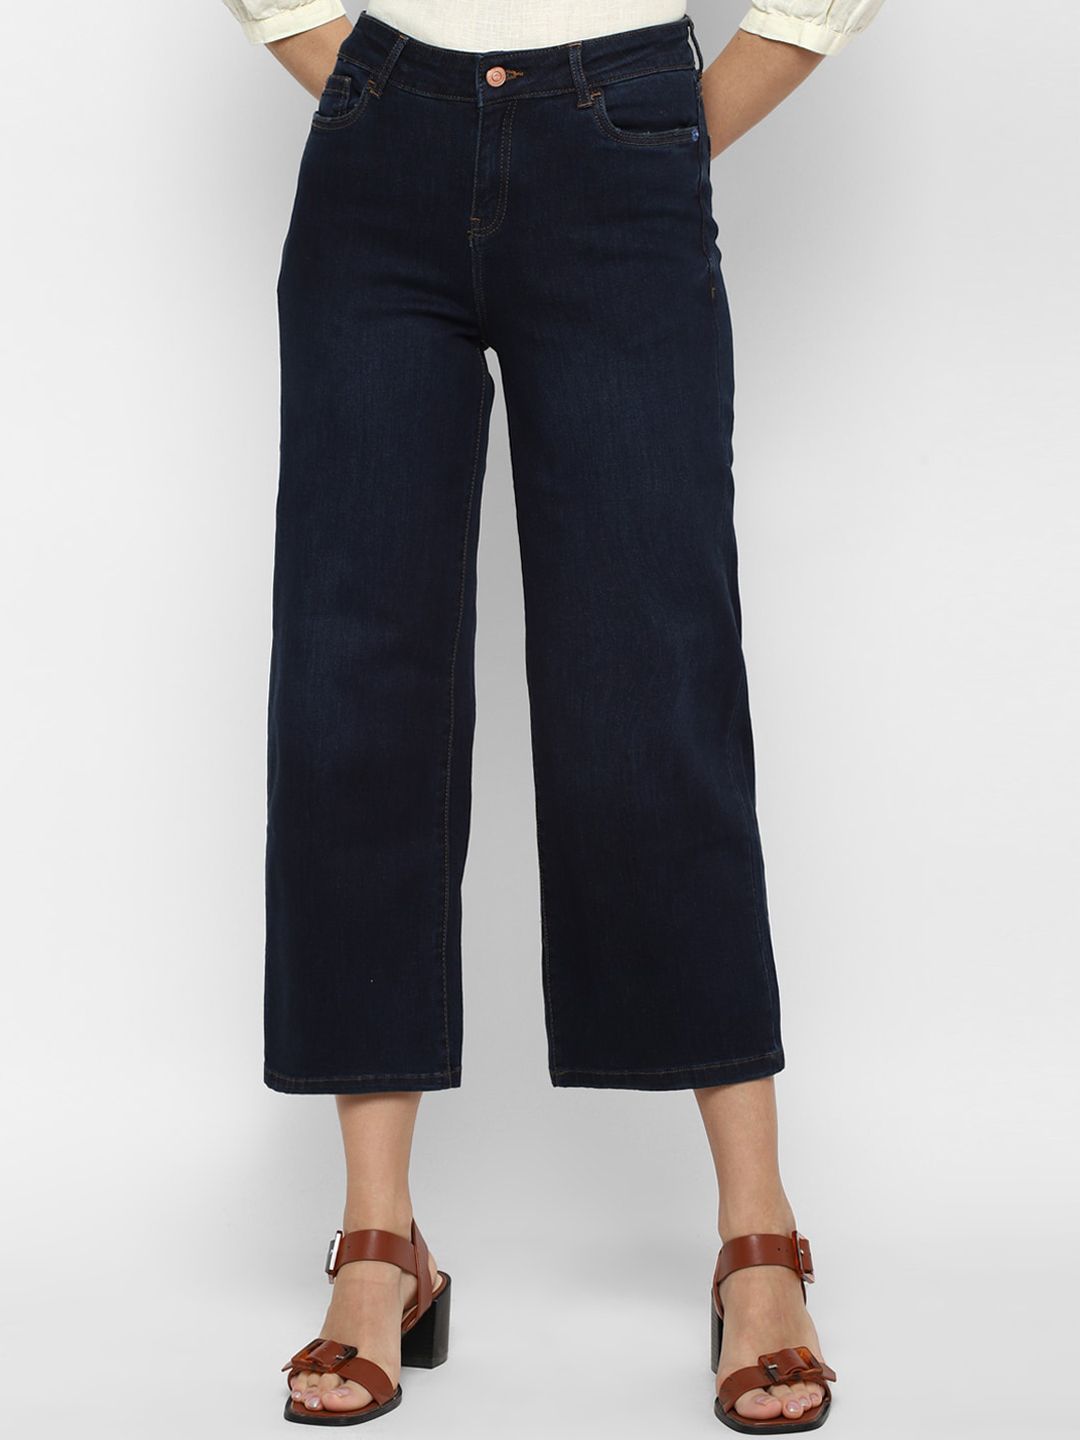 Allen Solly Woman Women Navy Blue No Fade Relaxed Fit Jeans Price in India